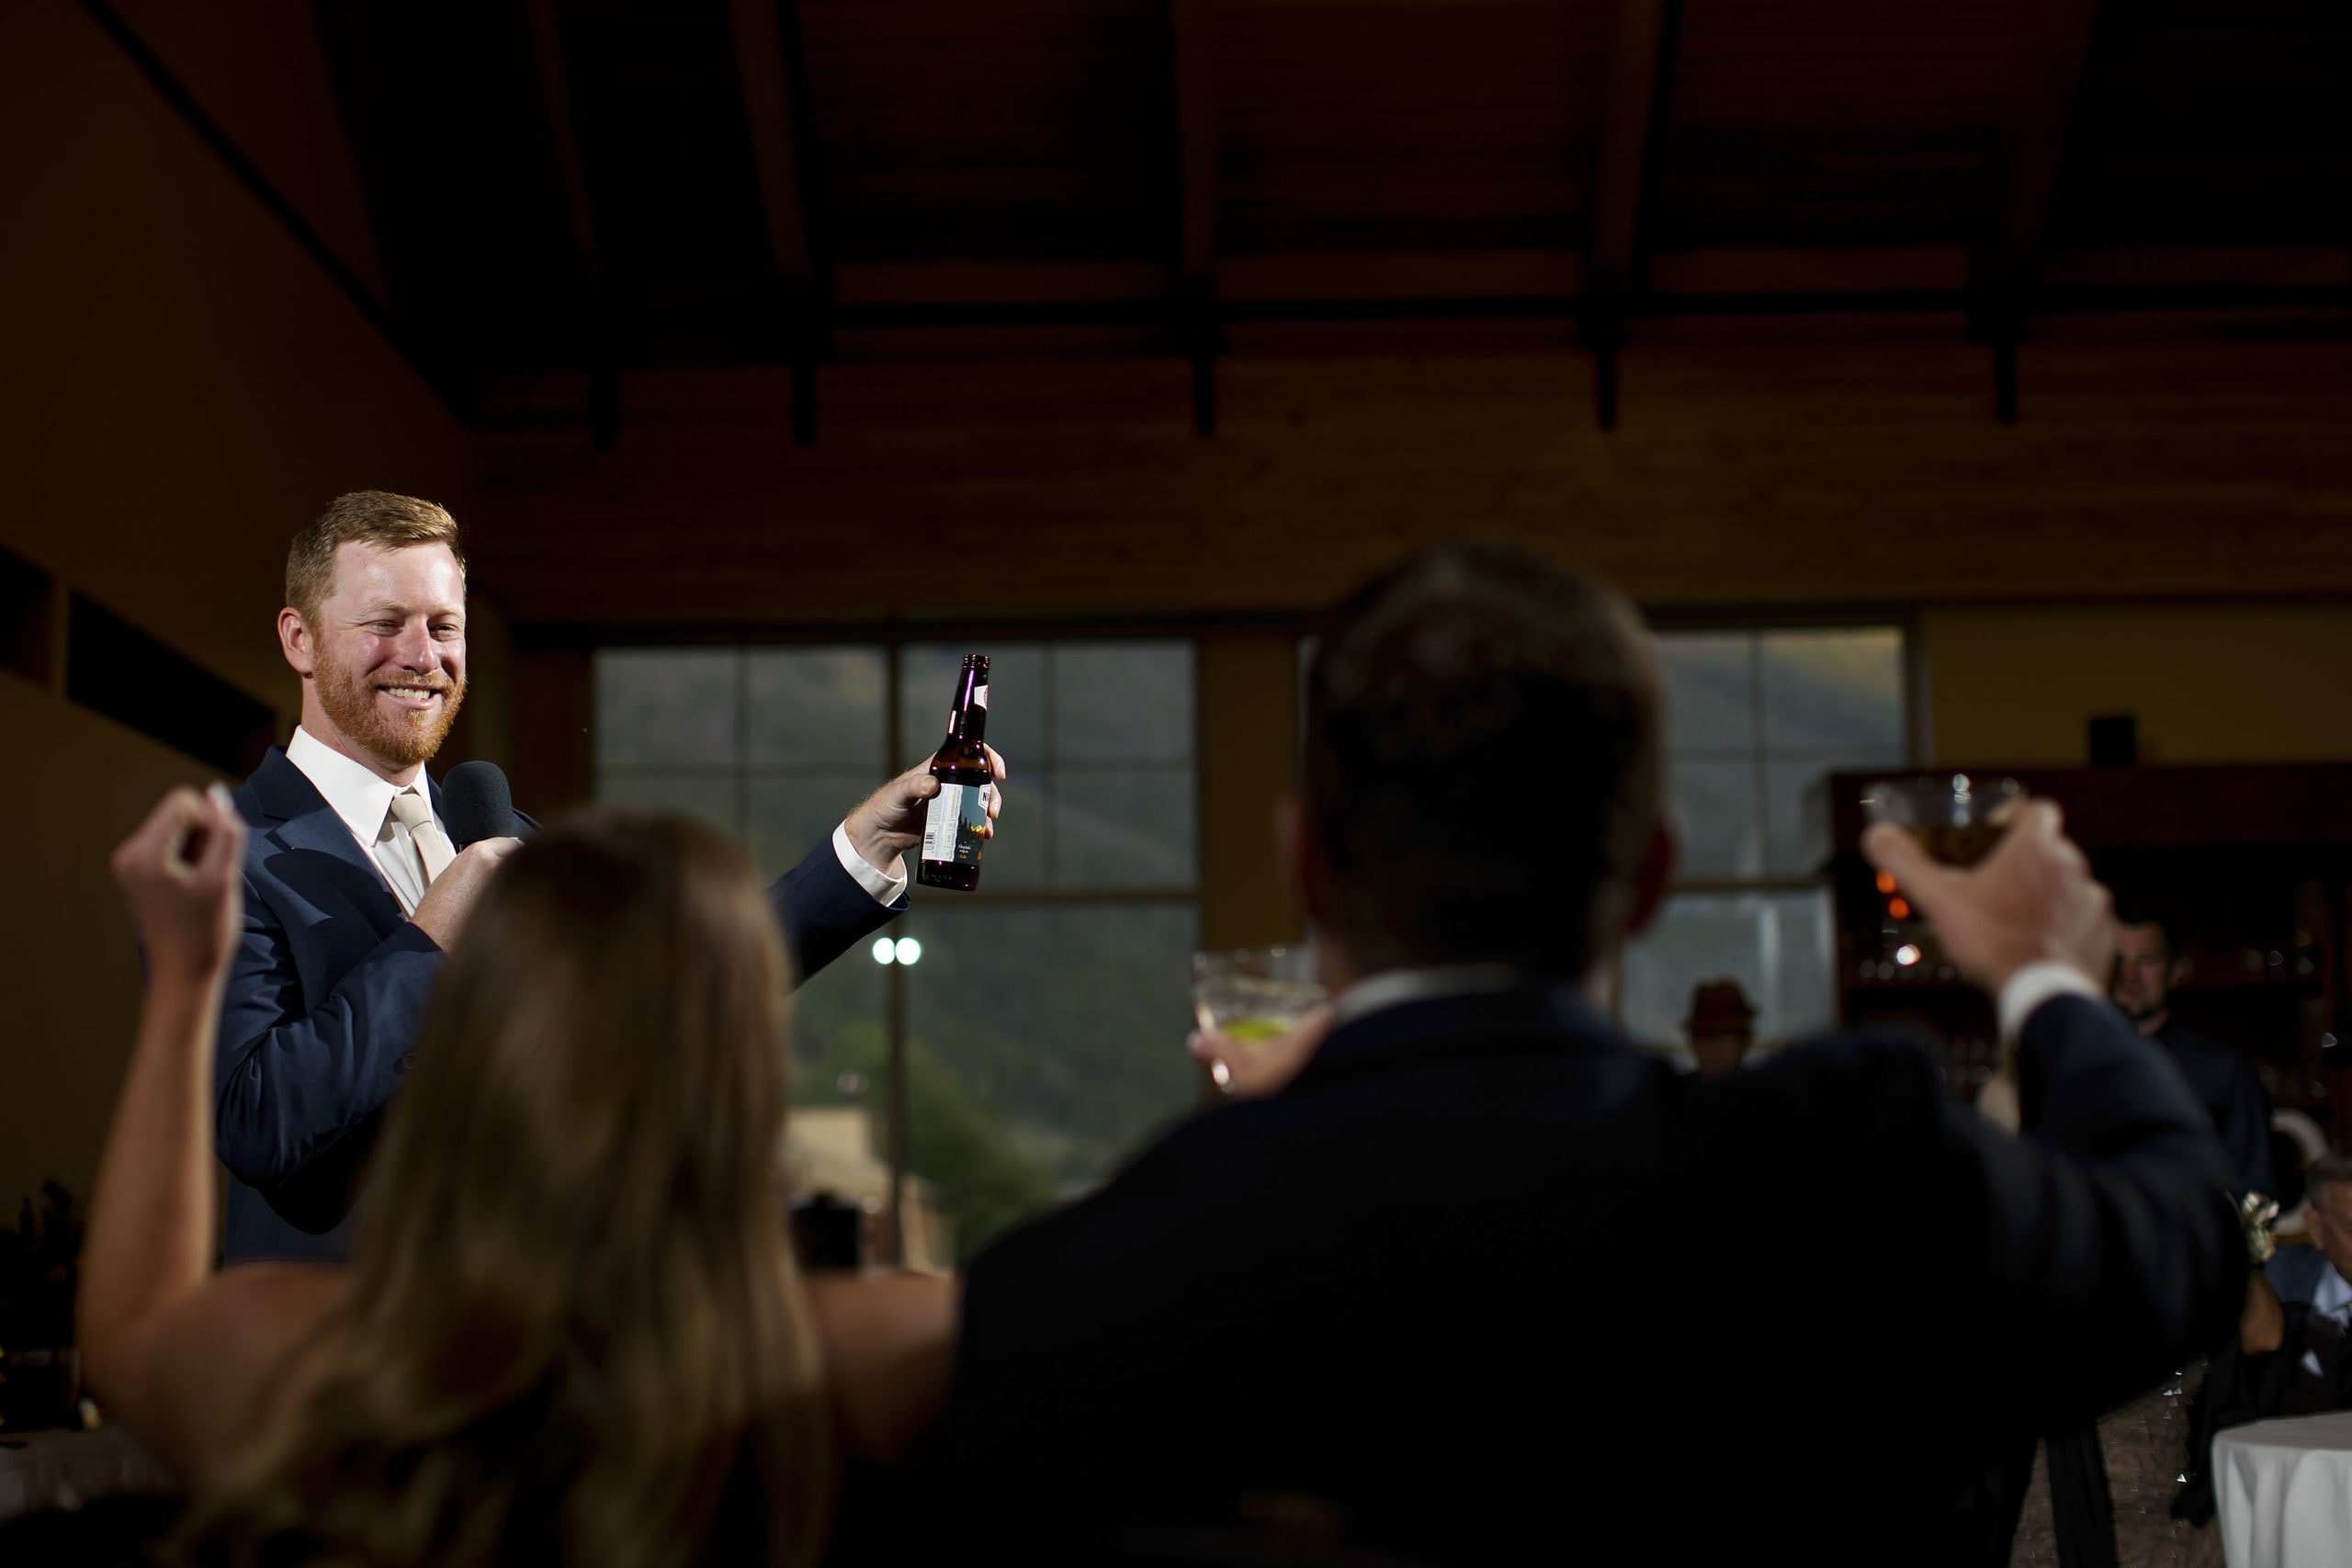 The bride’s brother toasts the newlyweds